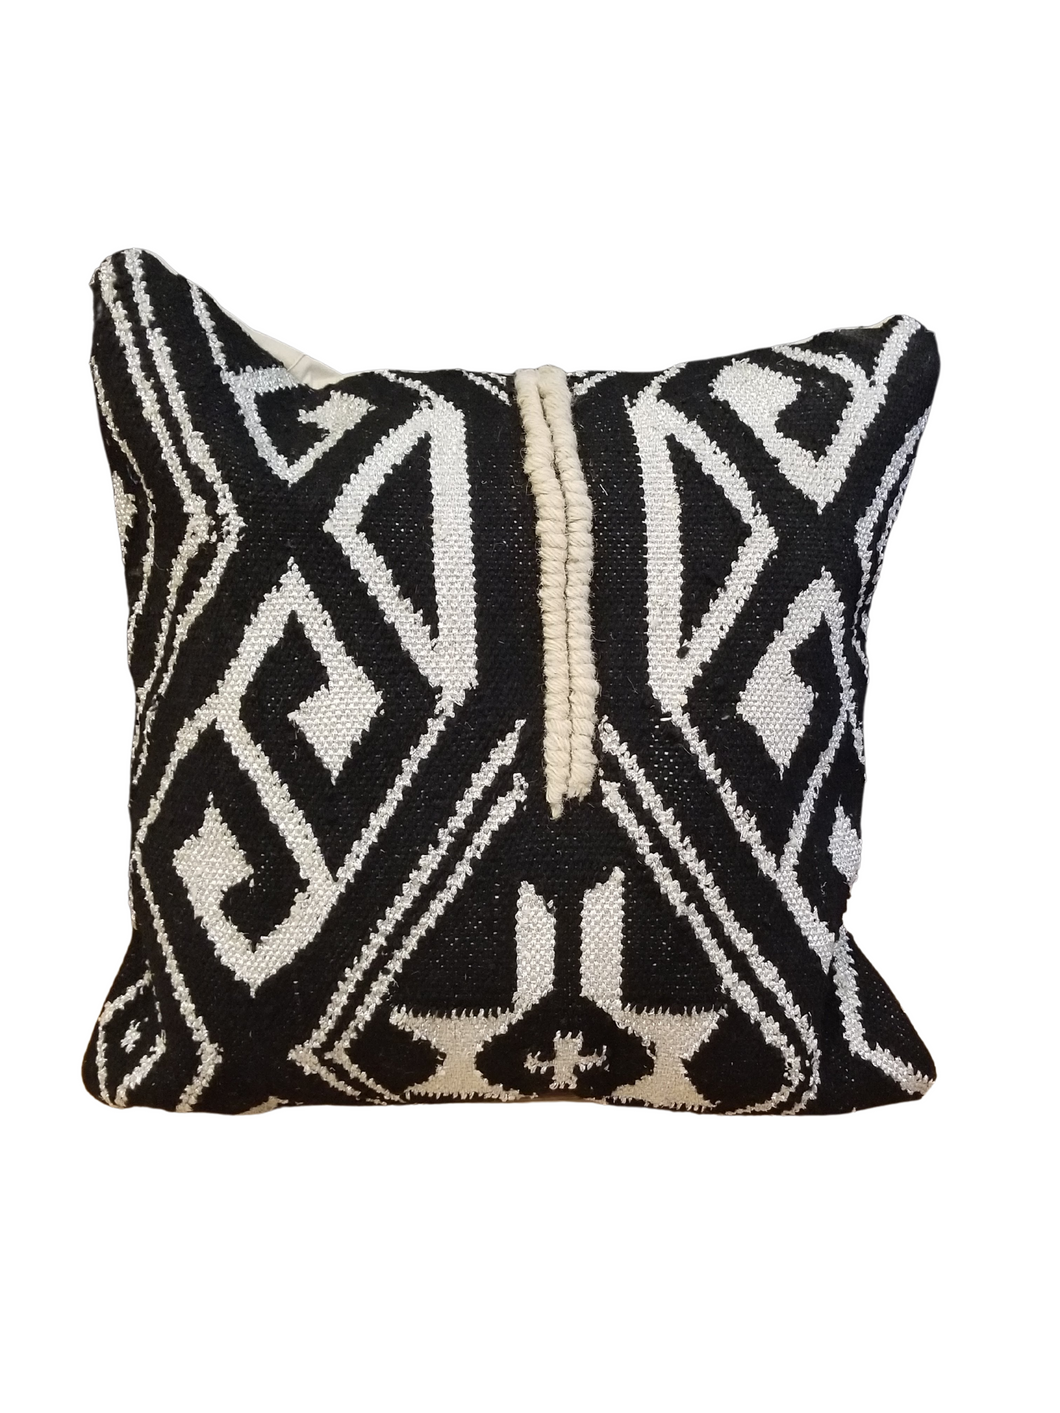 BLACK SILVER AND TAN PILLOW